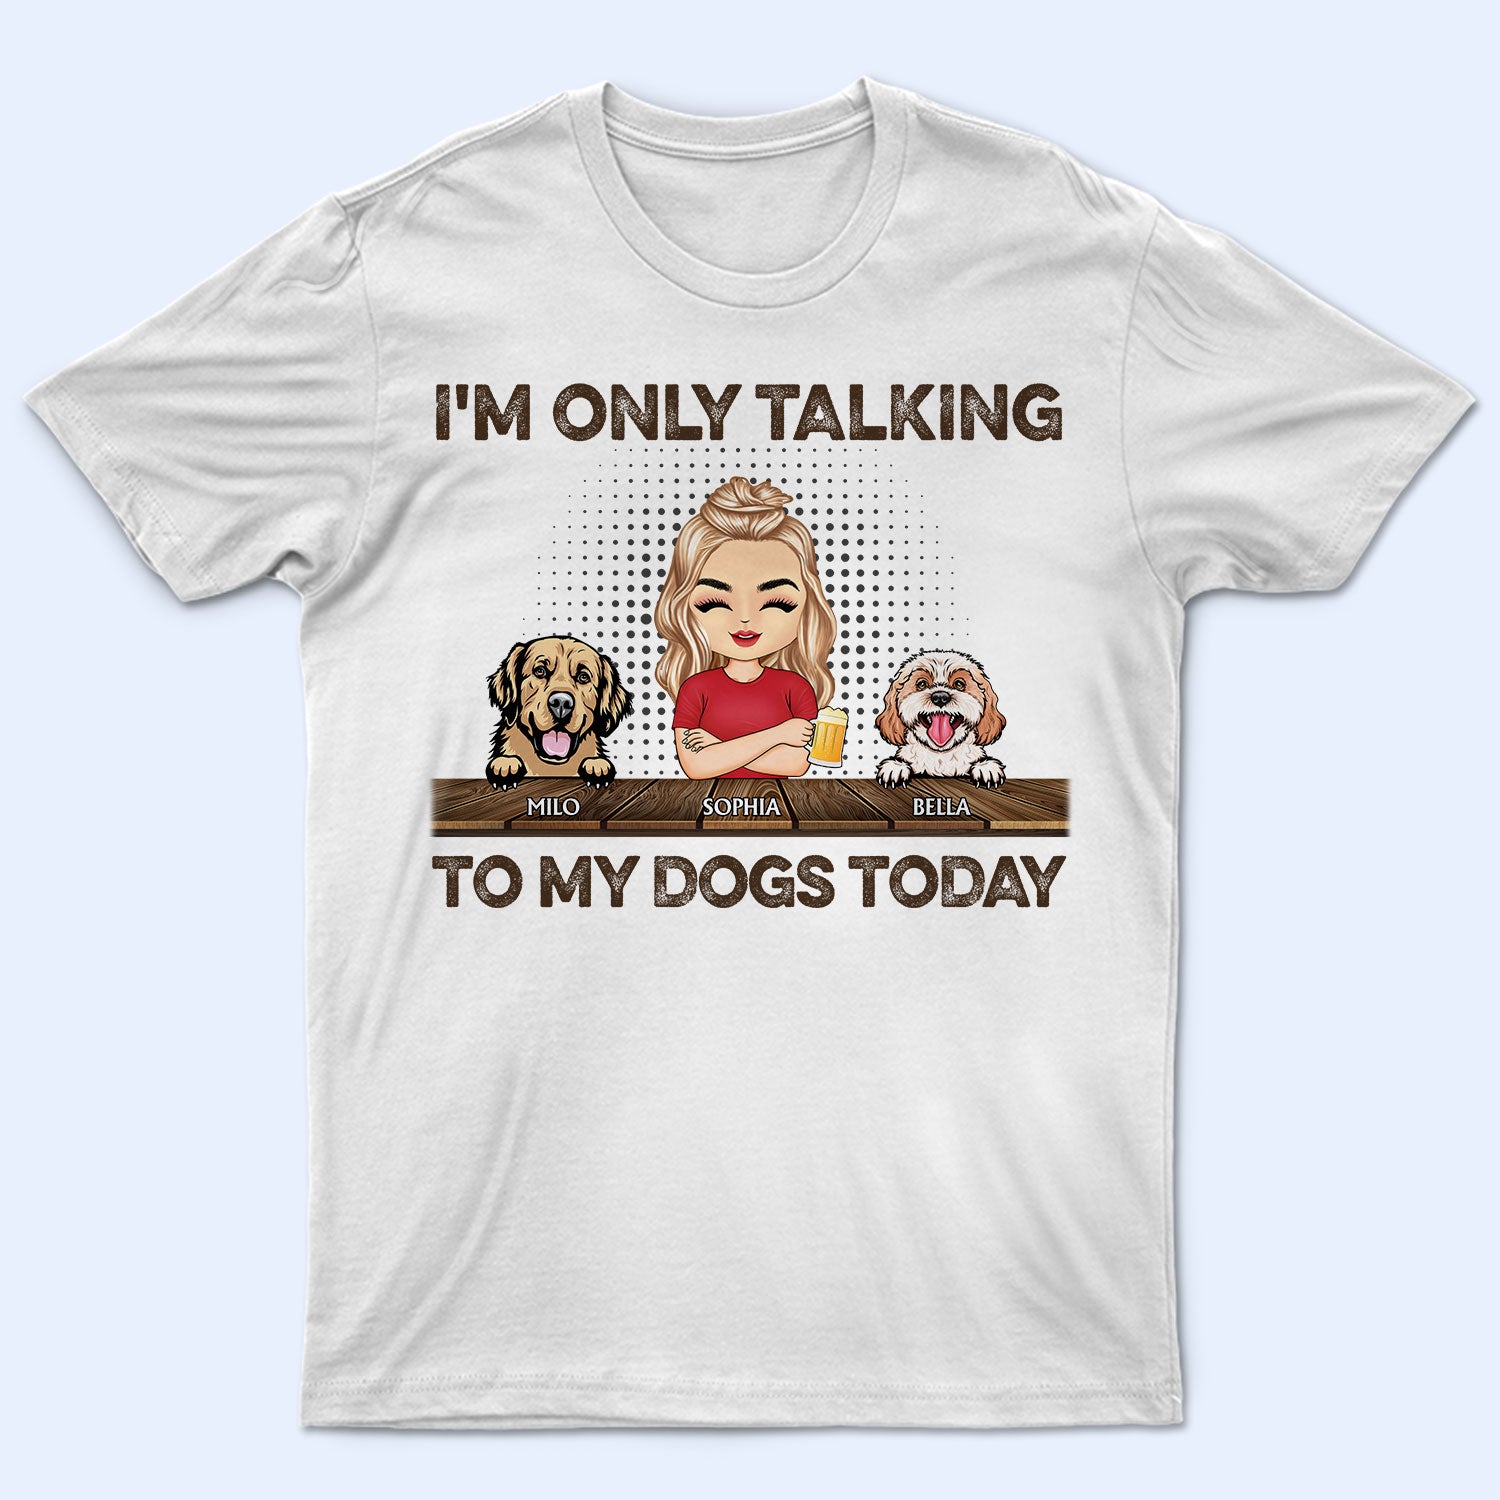 I'm Only Talking To My Dogs Today Chibi - Funny, Birthday Gift For Dog Mom, Dog, Dad, Dog Lovers, Cat Mom, Cat Dad, Cat Lovers, Pet Owners - Personalized Custom T Shirt